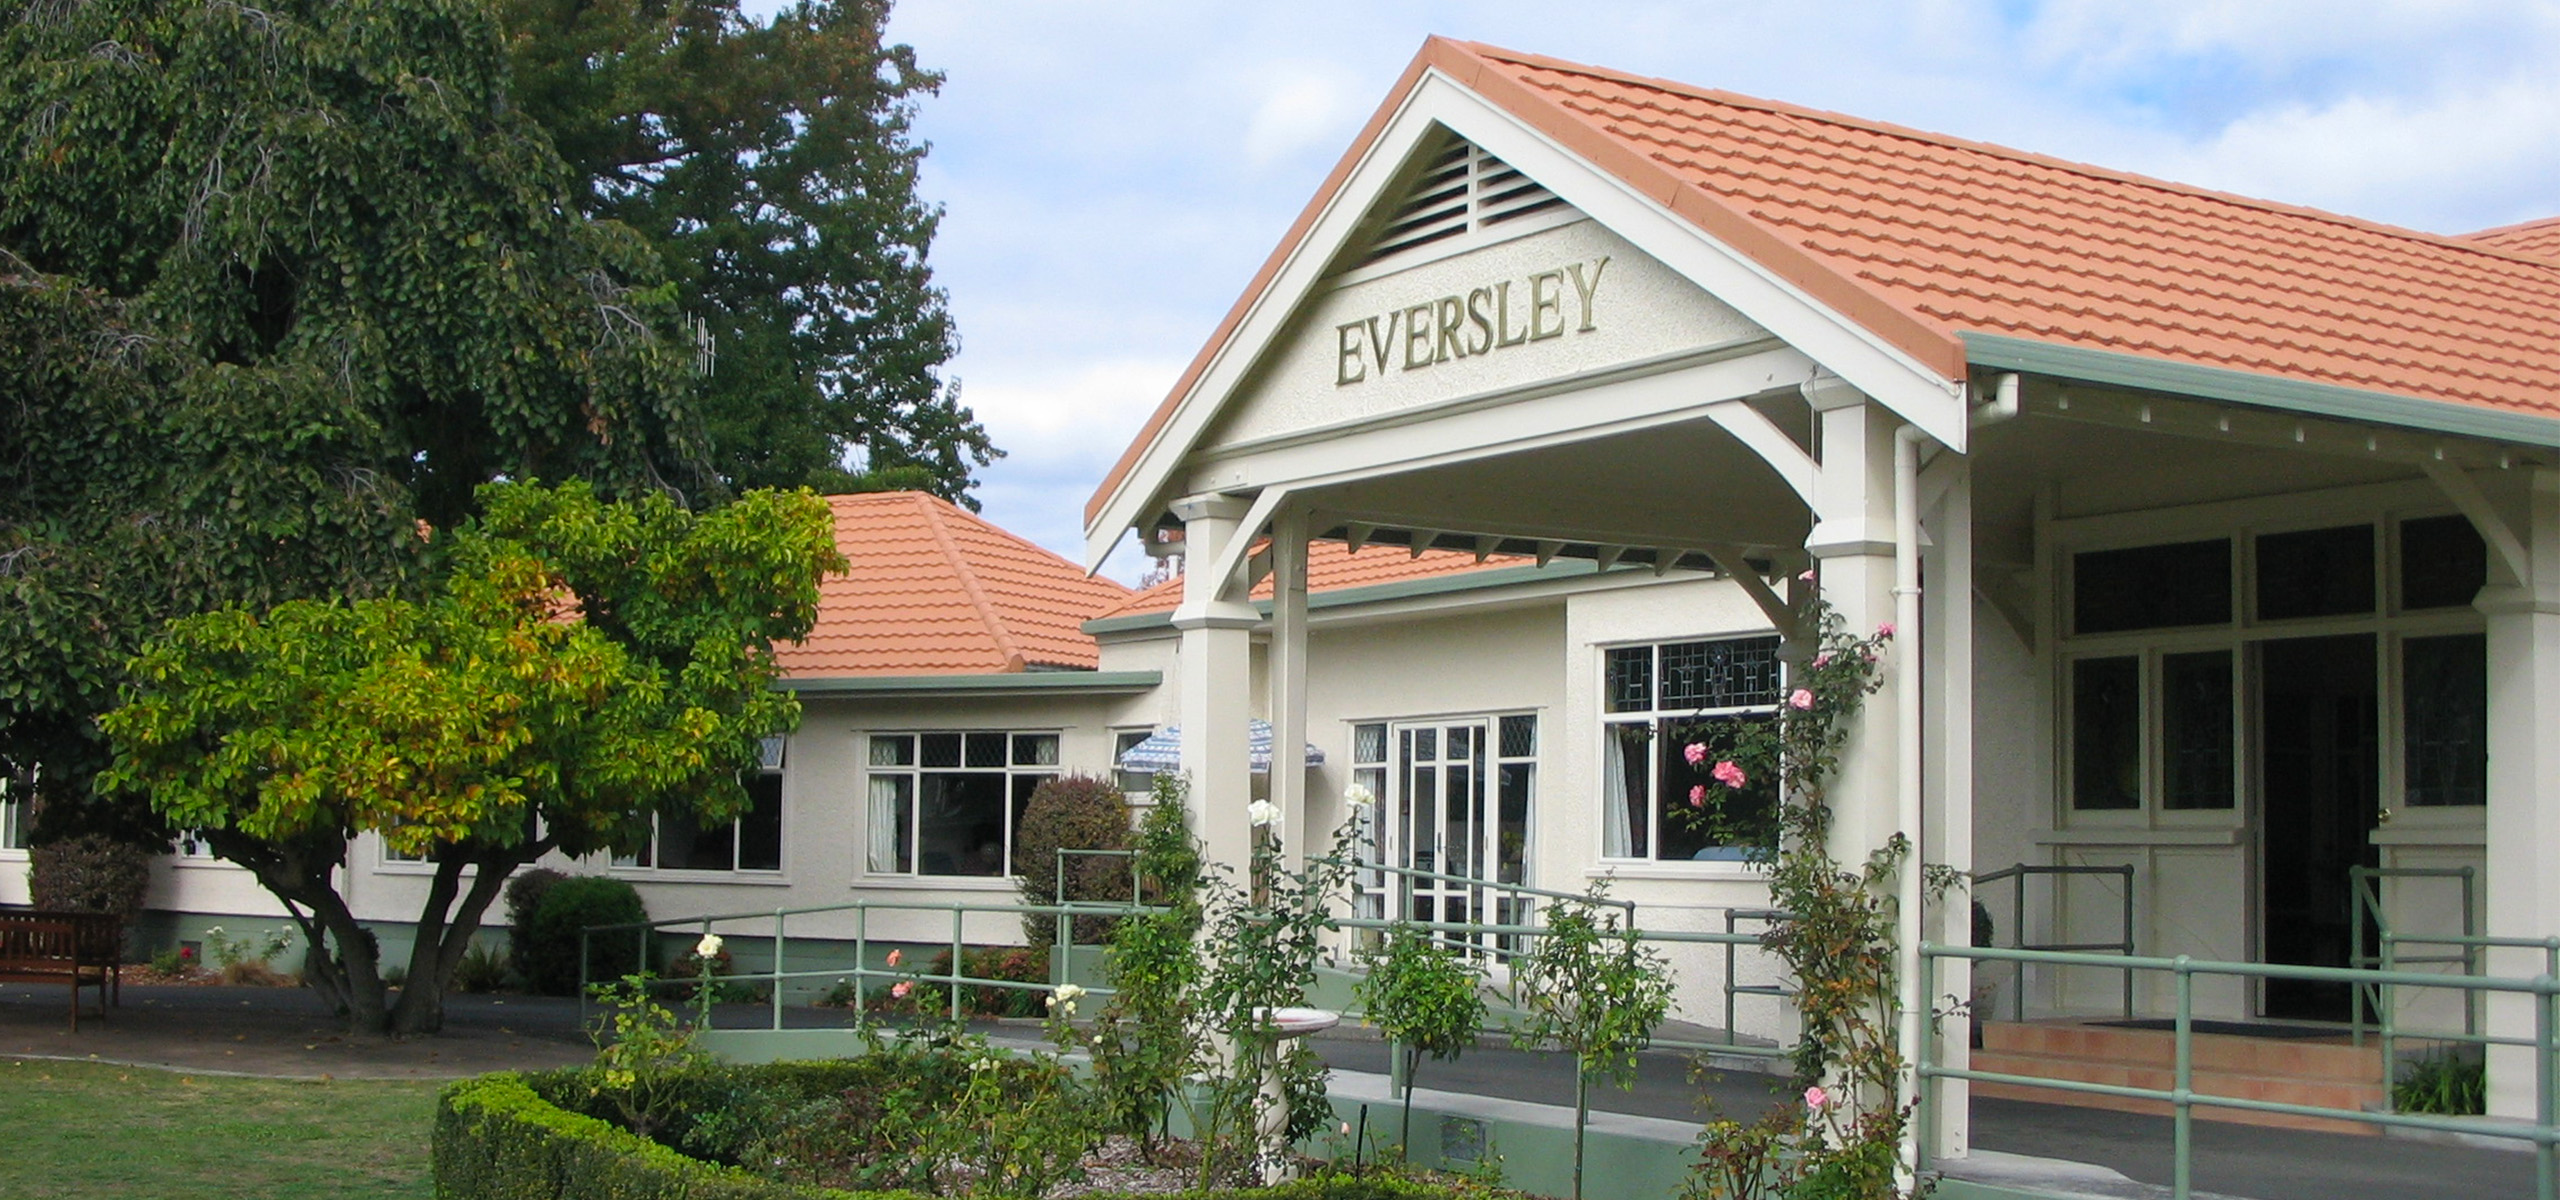 Eversley front entrance exterior